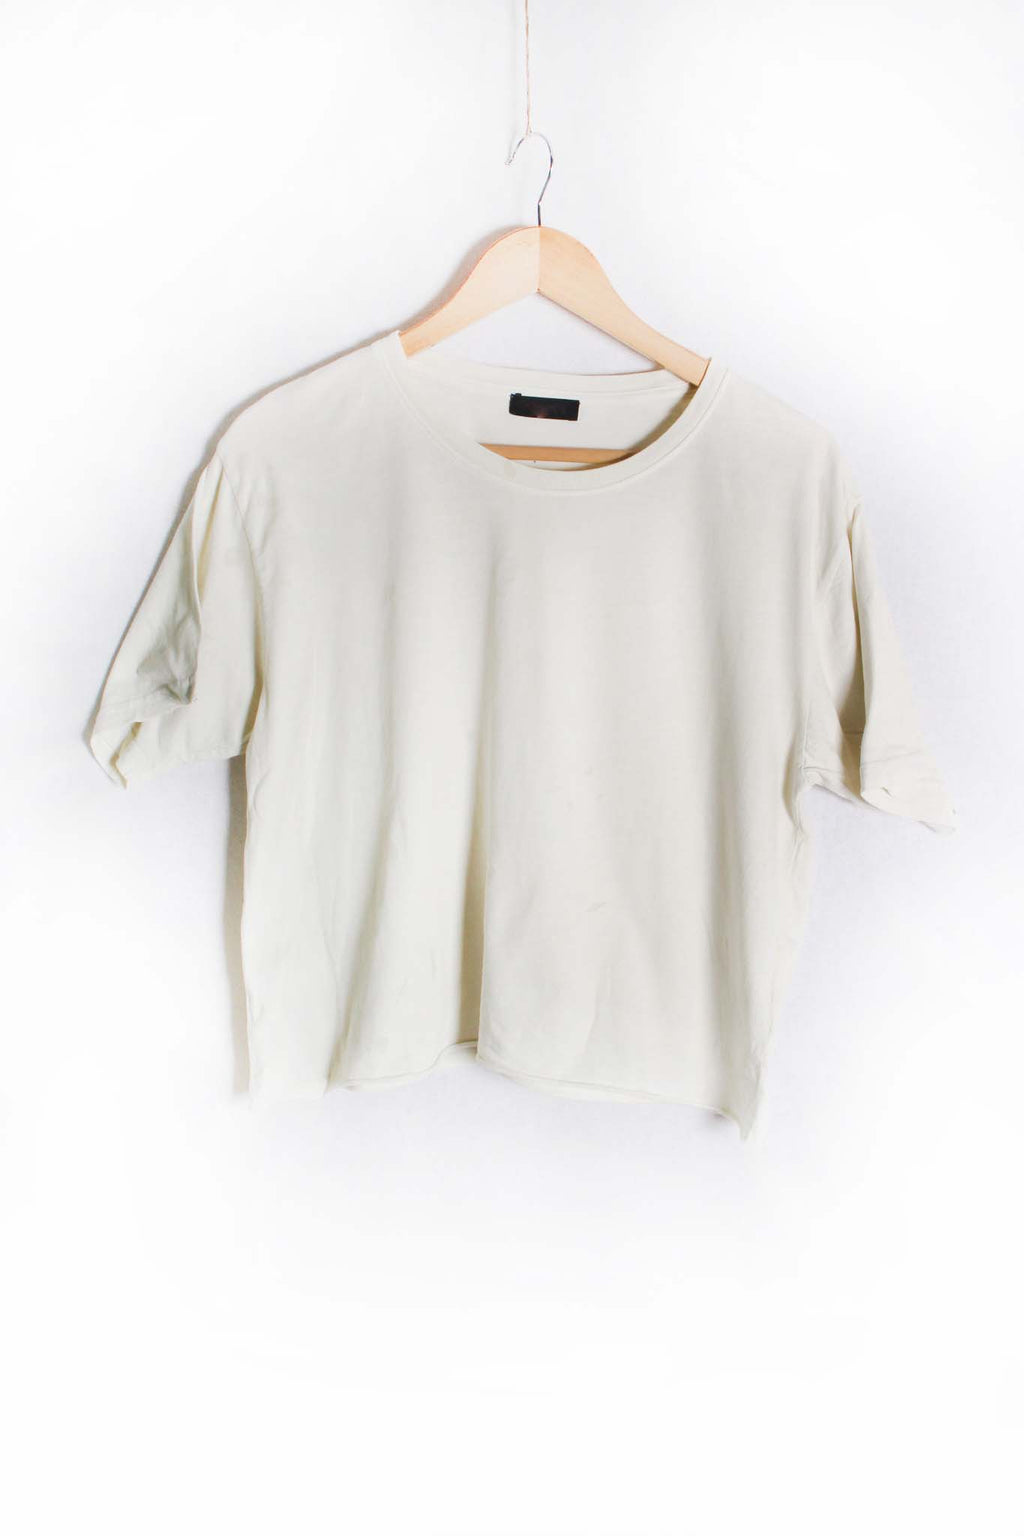 Women's Short Sleeve Crewneck Solid Cropped Top